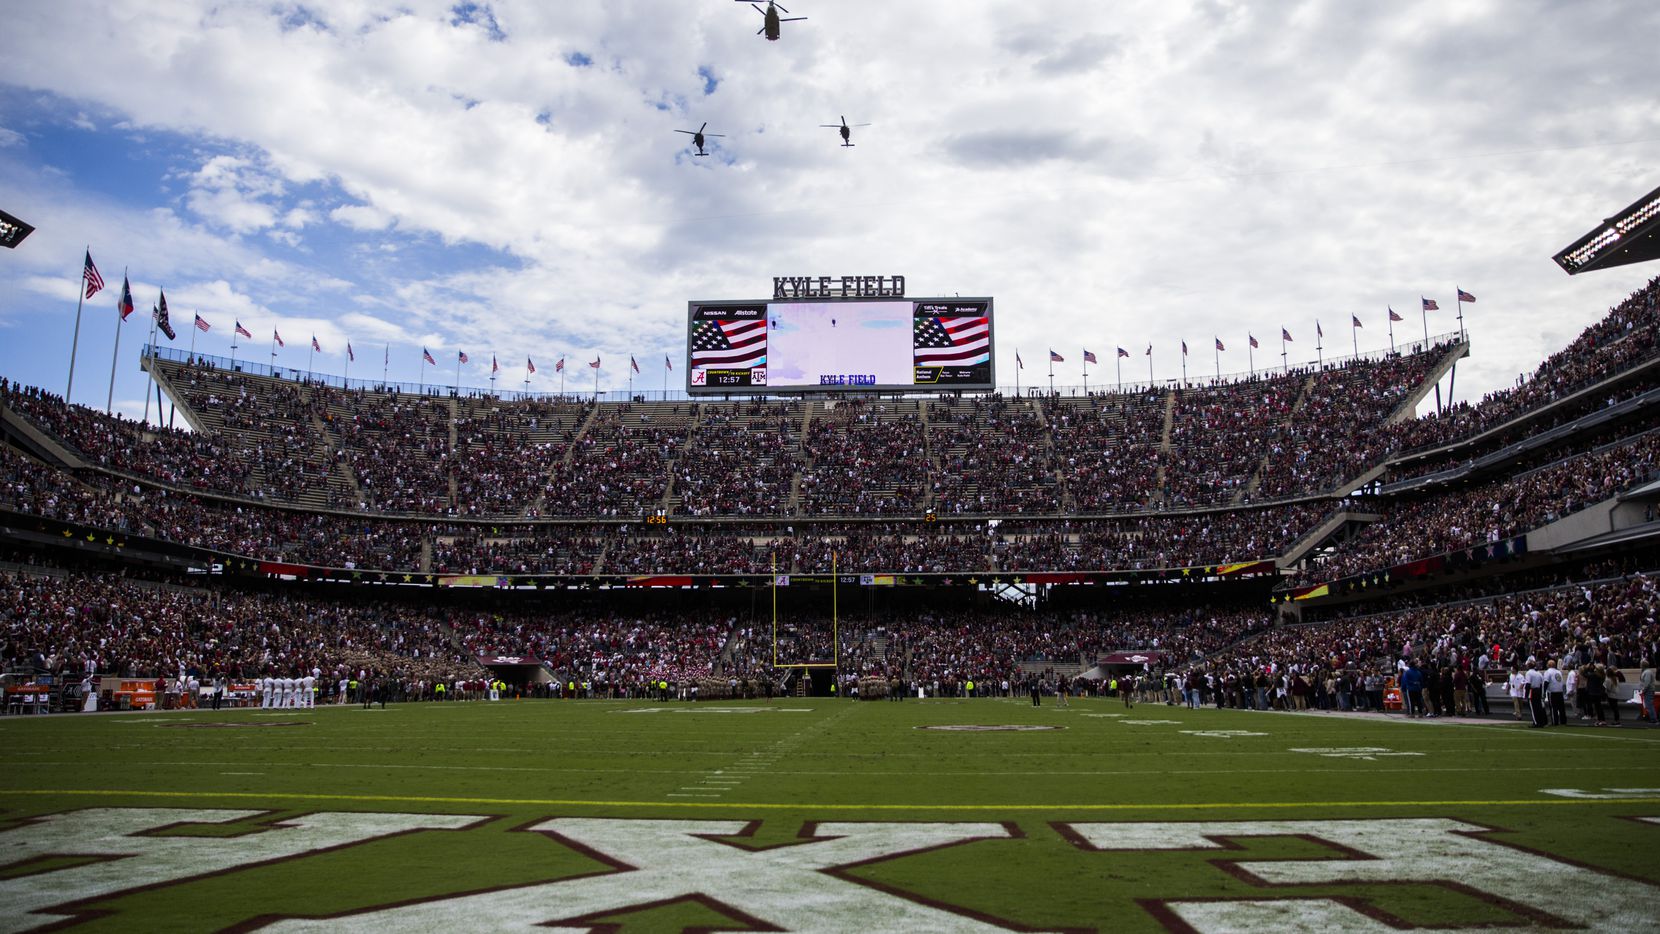 Helicopters fly over Kyle Field before a college football game between Texas A&M and Alabama...